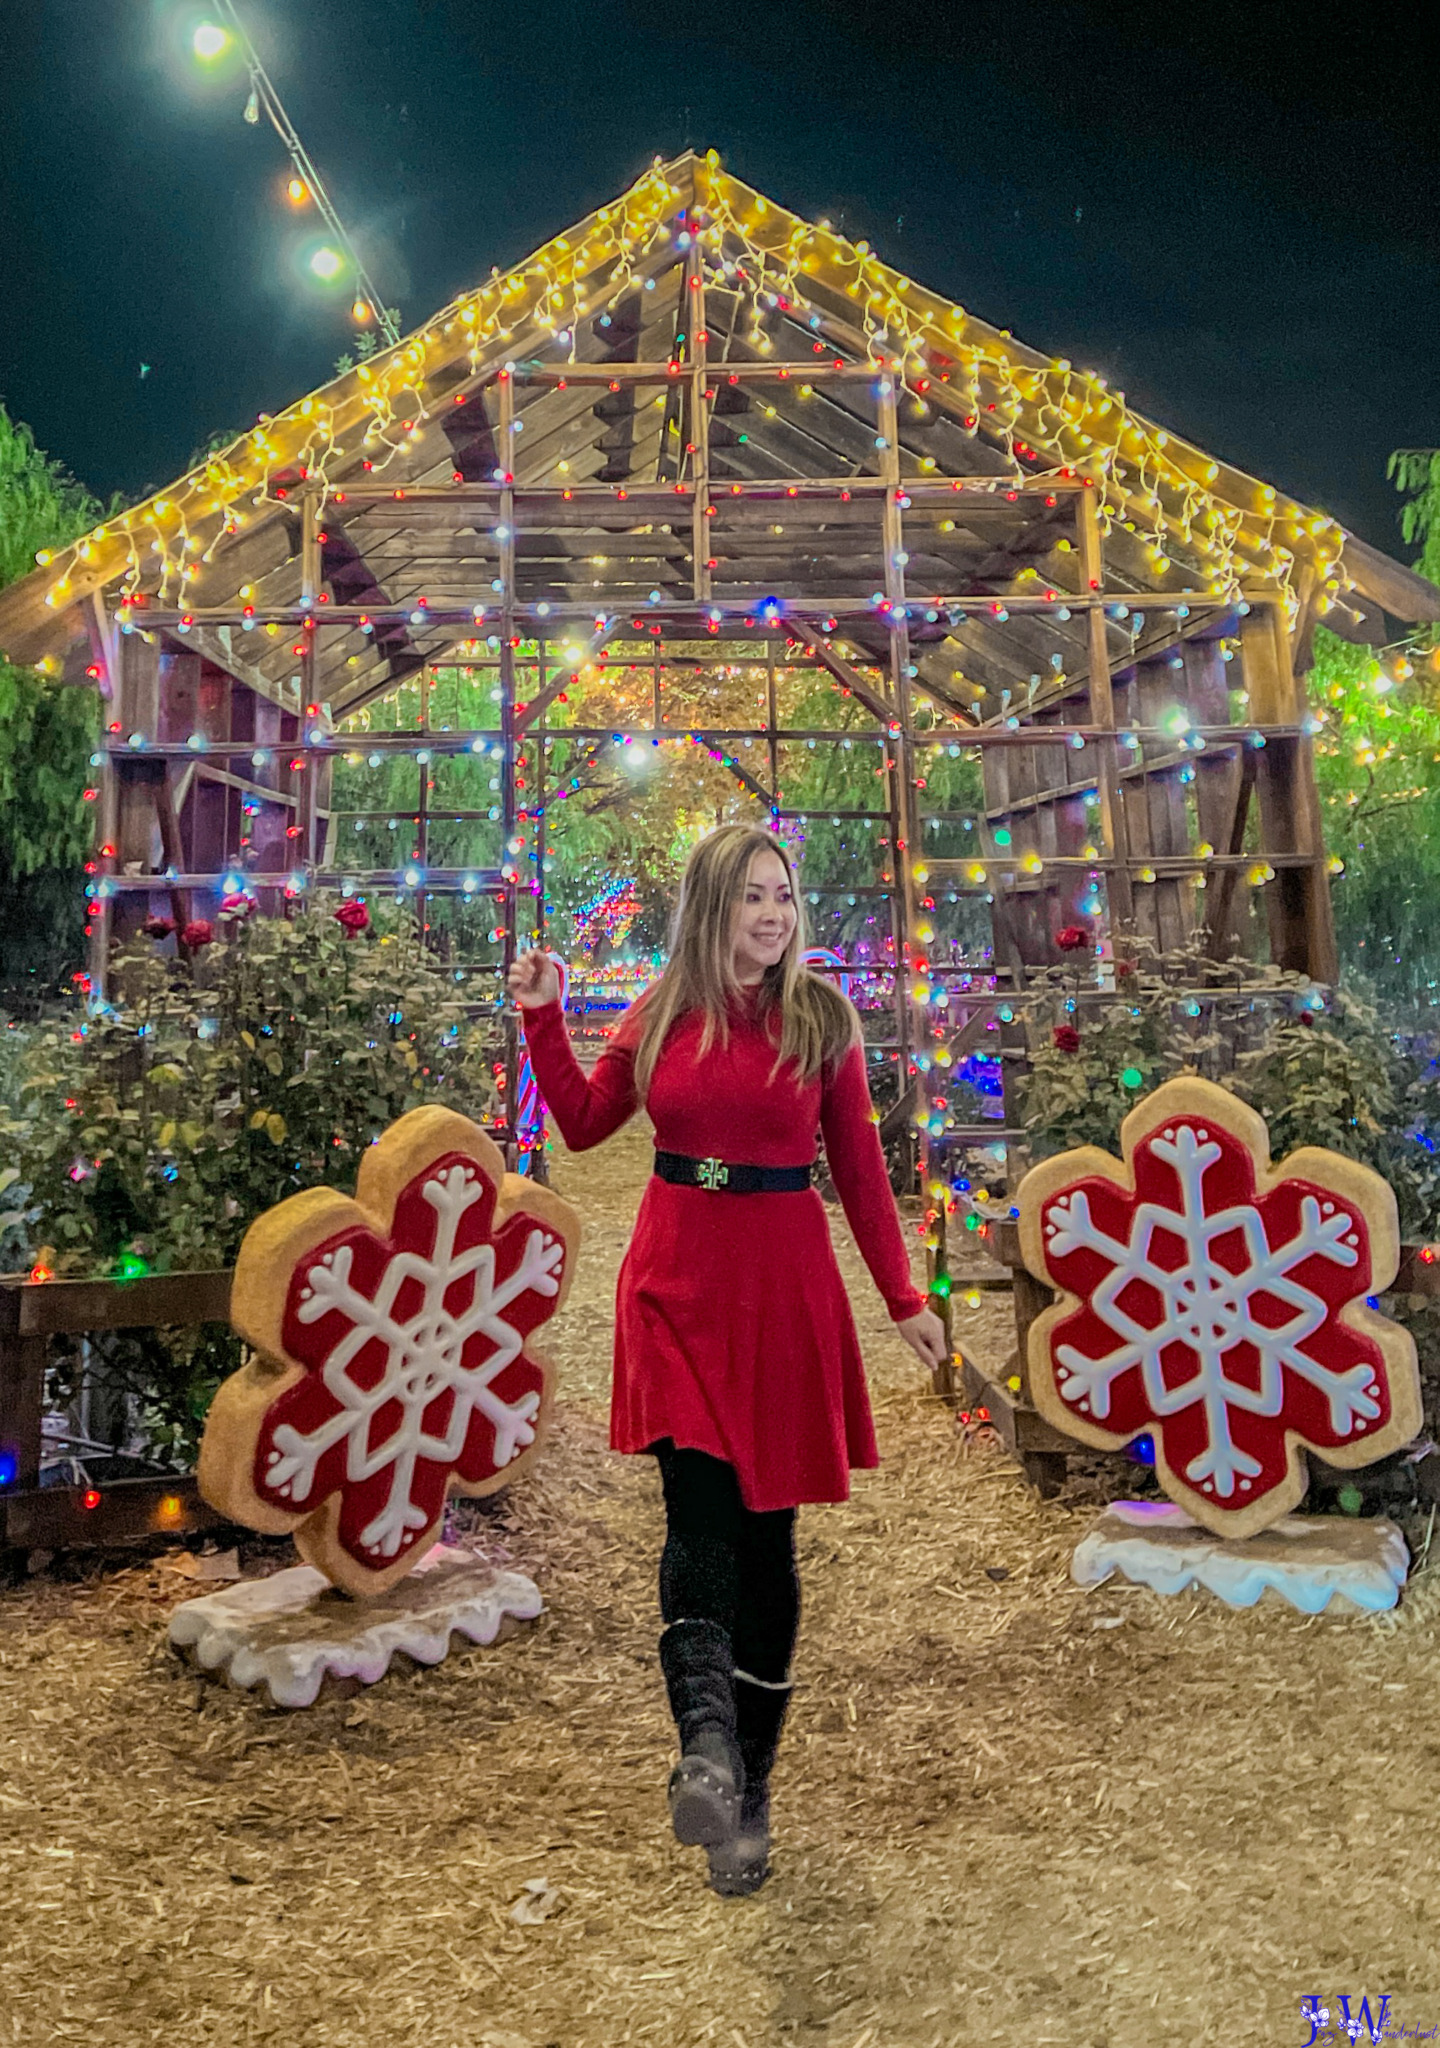 Live Oak Canyon holiday lights and Christmas displays. Photography by Jaz Wanderlust.